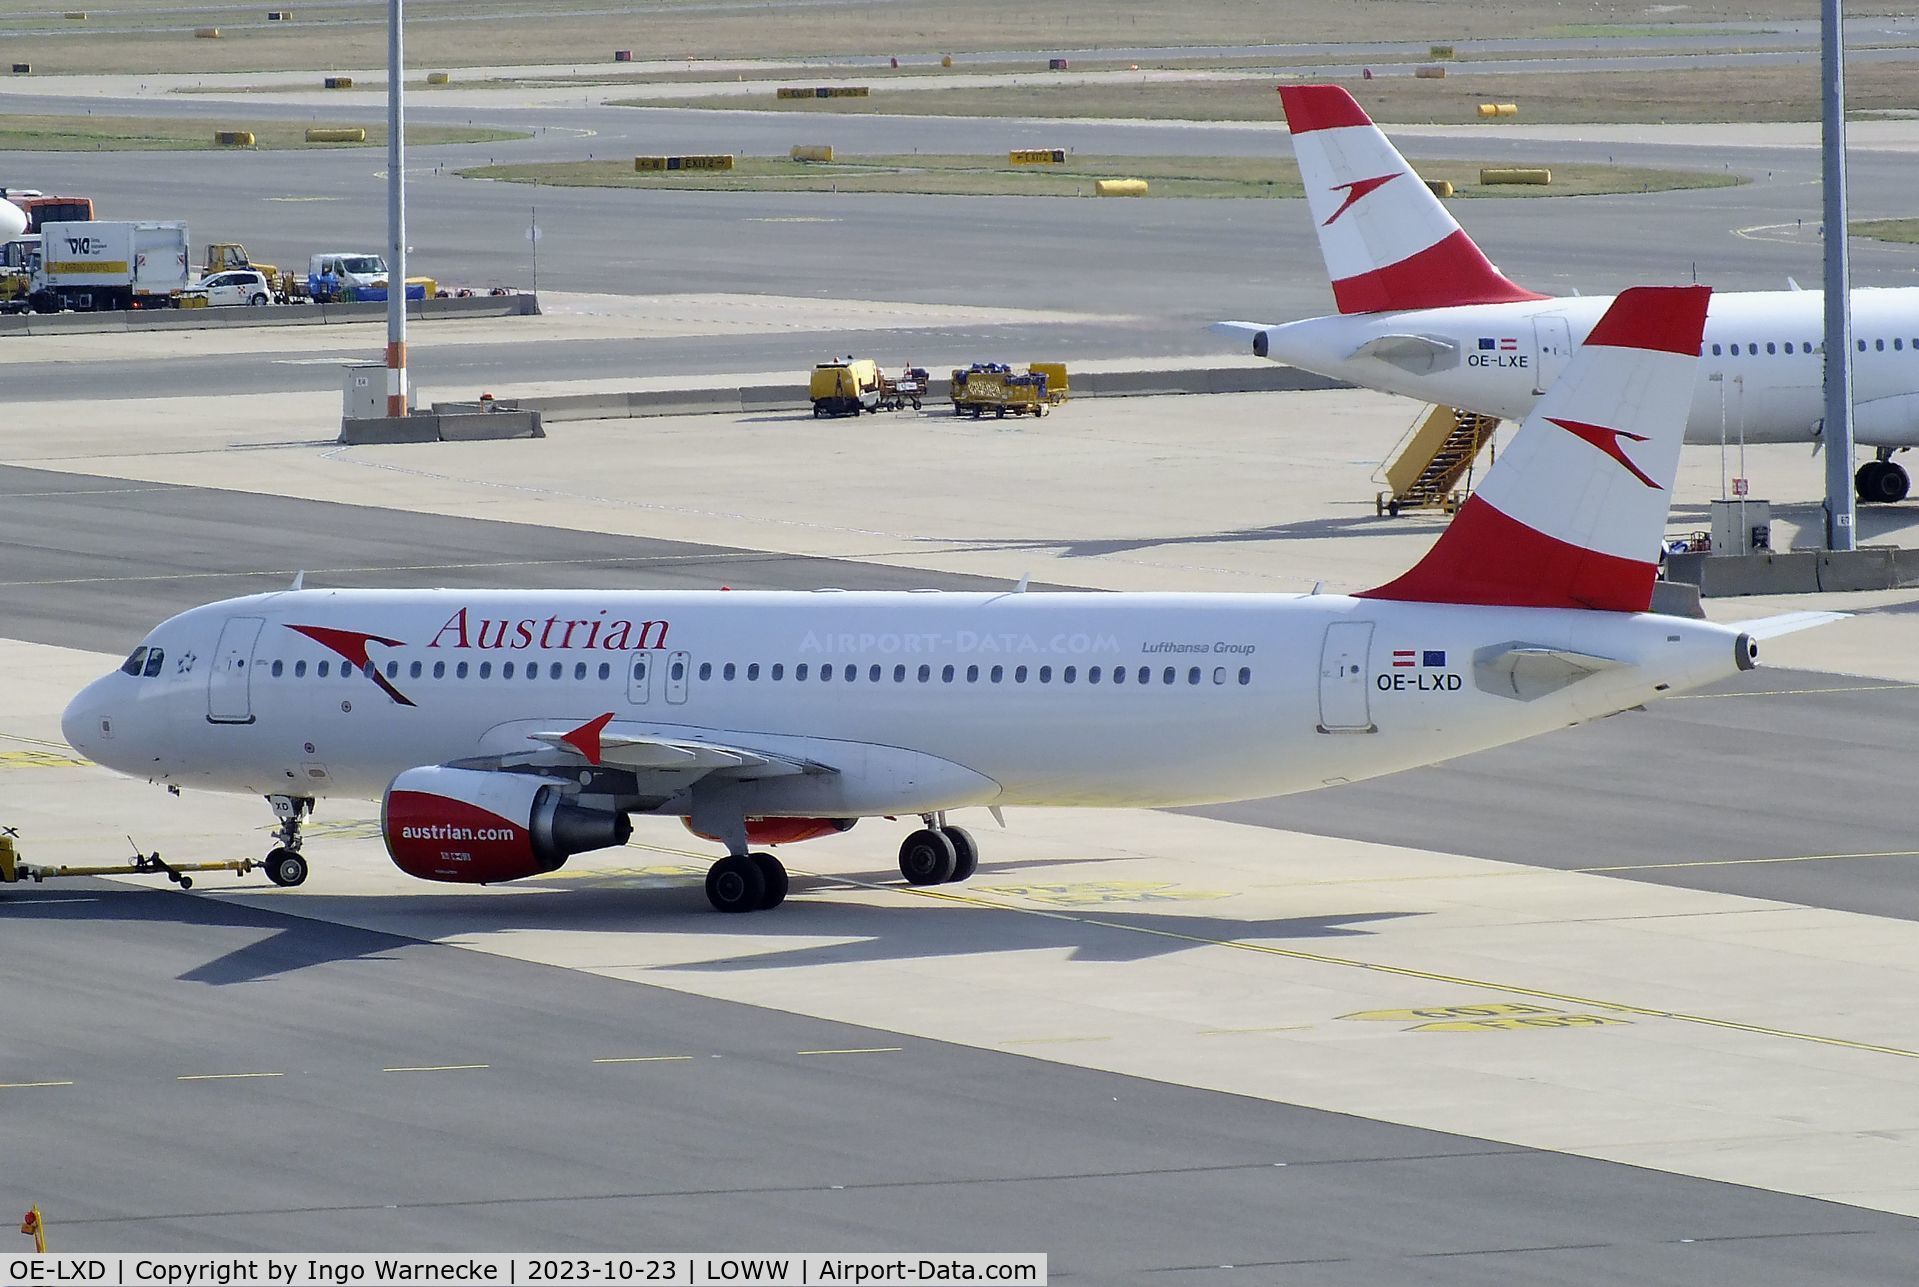 OE-LXD, 2008 Airbus A320-216 C/N 3515, Airbus A320-216 of Austrian Airlines at Wien-Schwechat airport